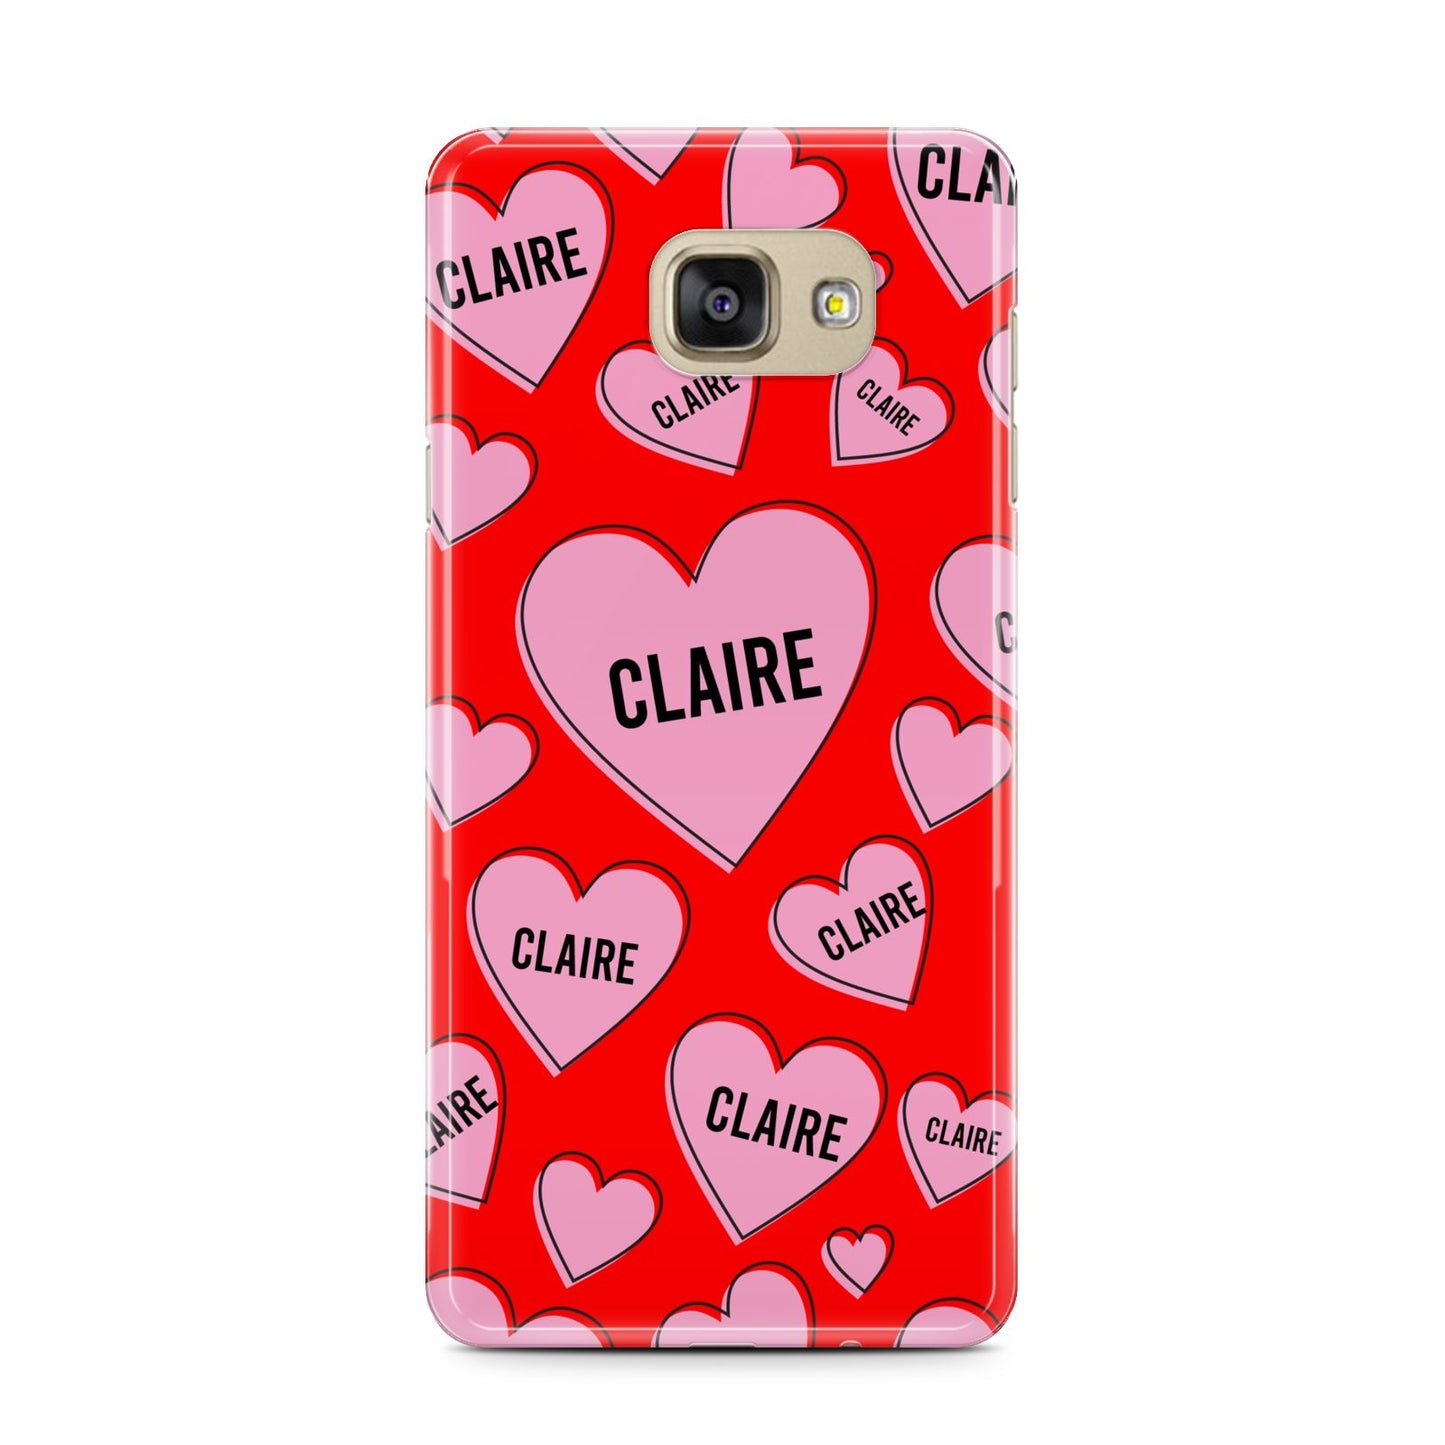 Personalised Hearts Samsung Galaxy A7 2016 Case on gold phone